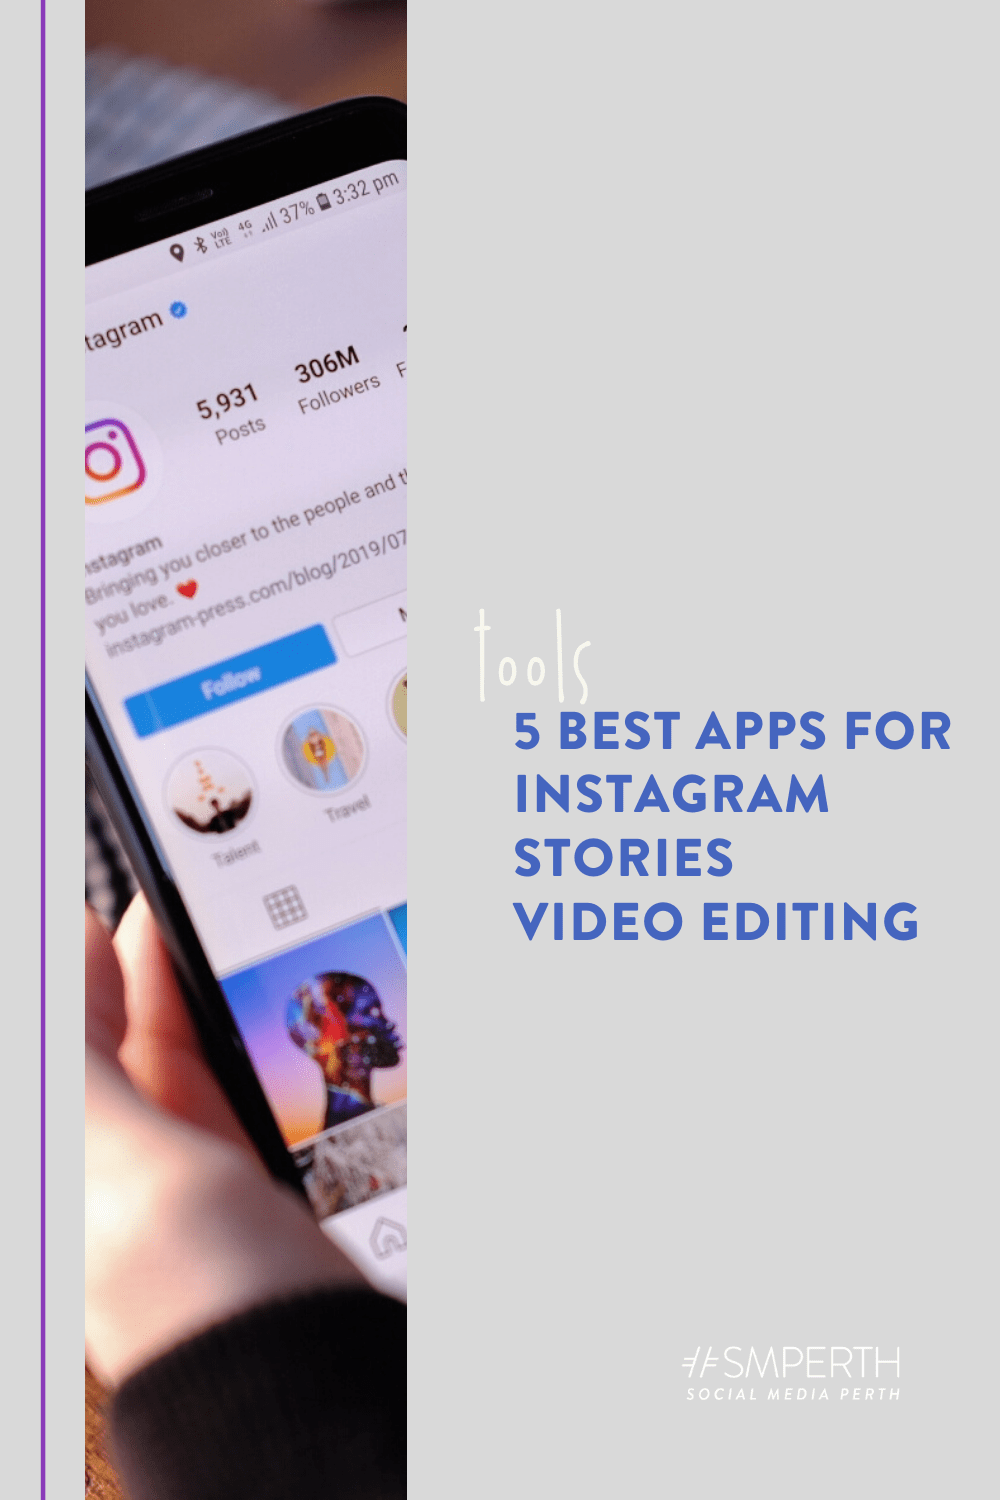 7 Best Apps for Instagram Stories Video Editing